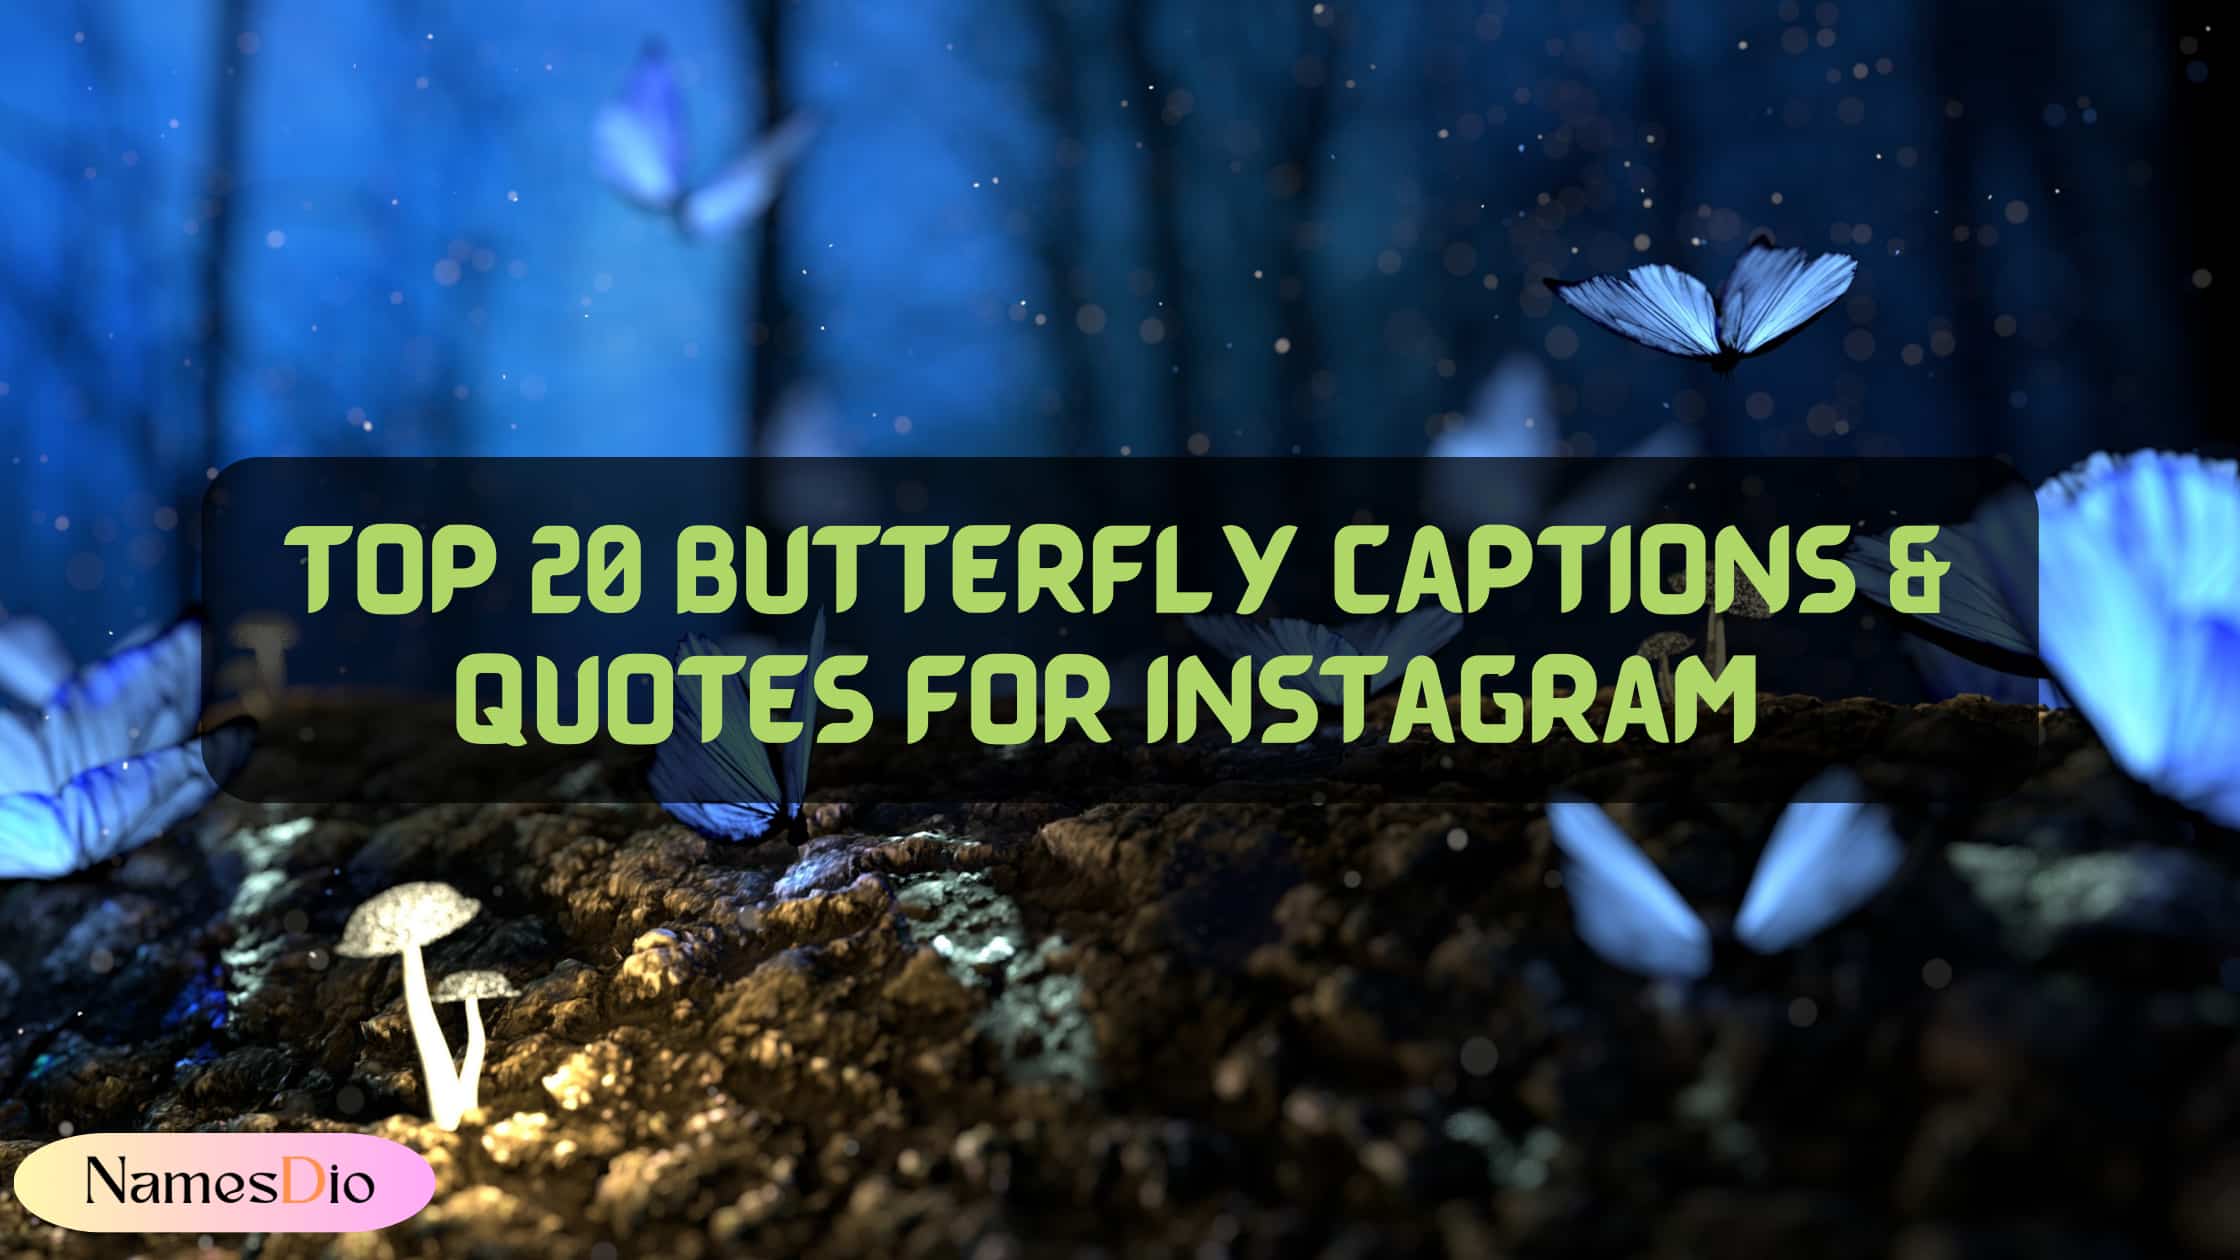 Top-20-Butterfly-Captions-for-Instagram-Quotes